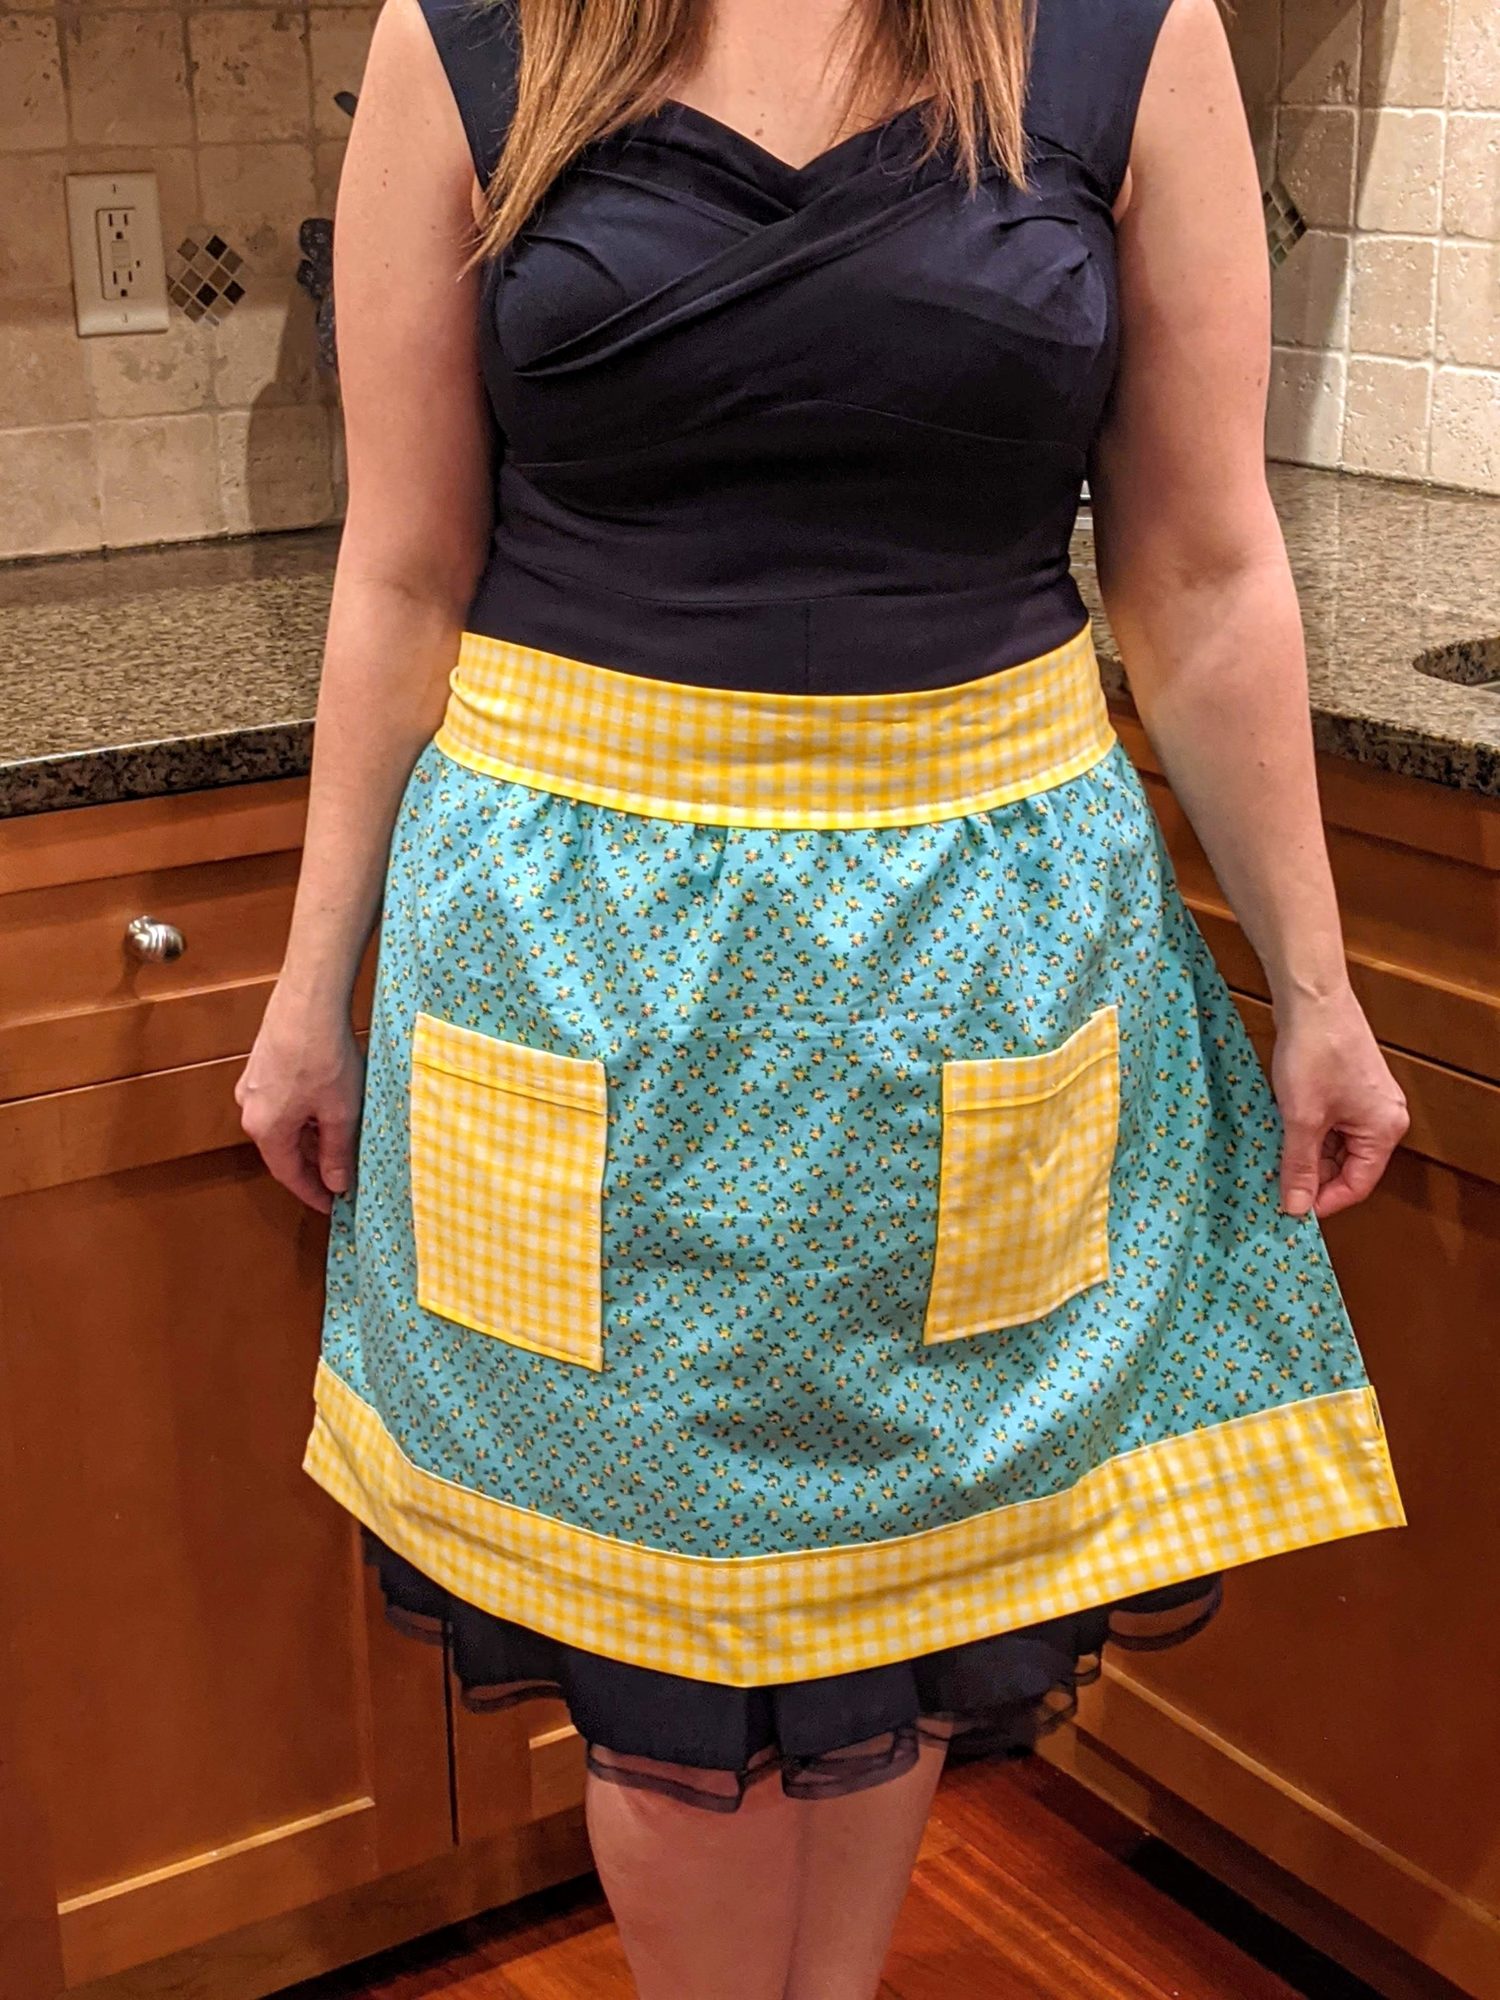 How To Sew a Gathered Half Apron  Simple Beginner Sewing Tutorial